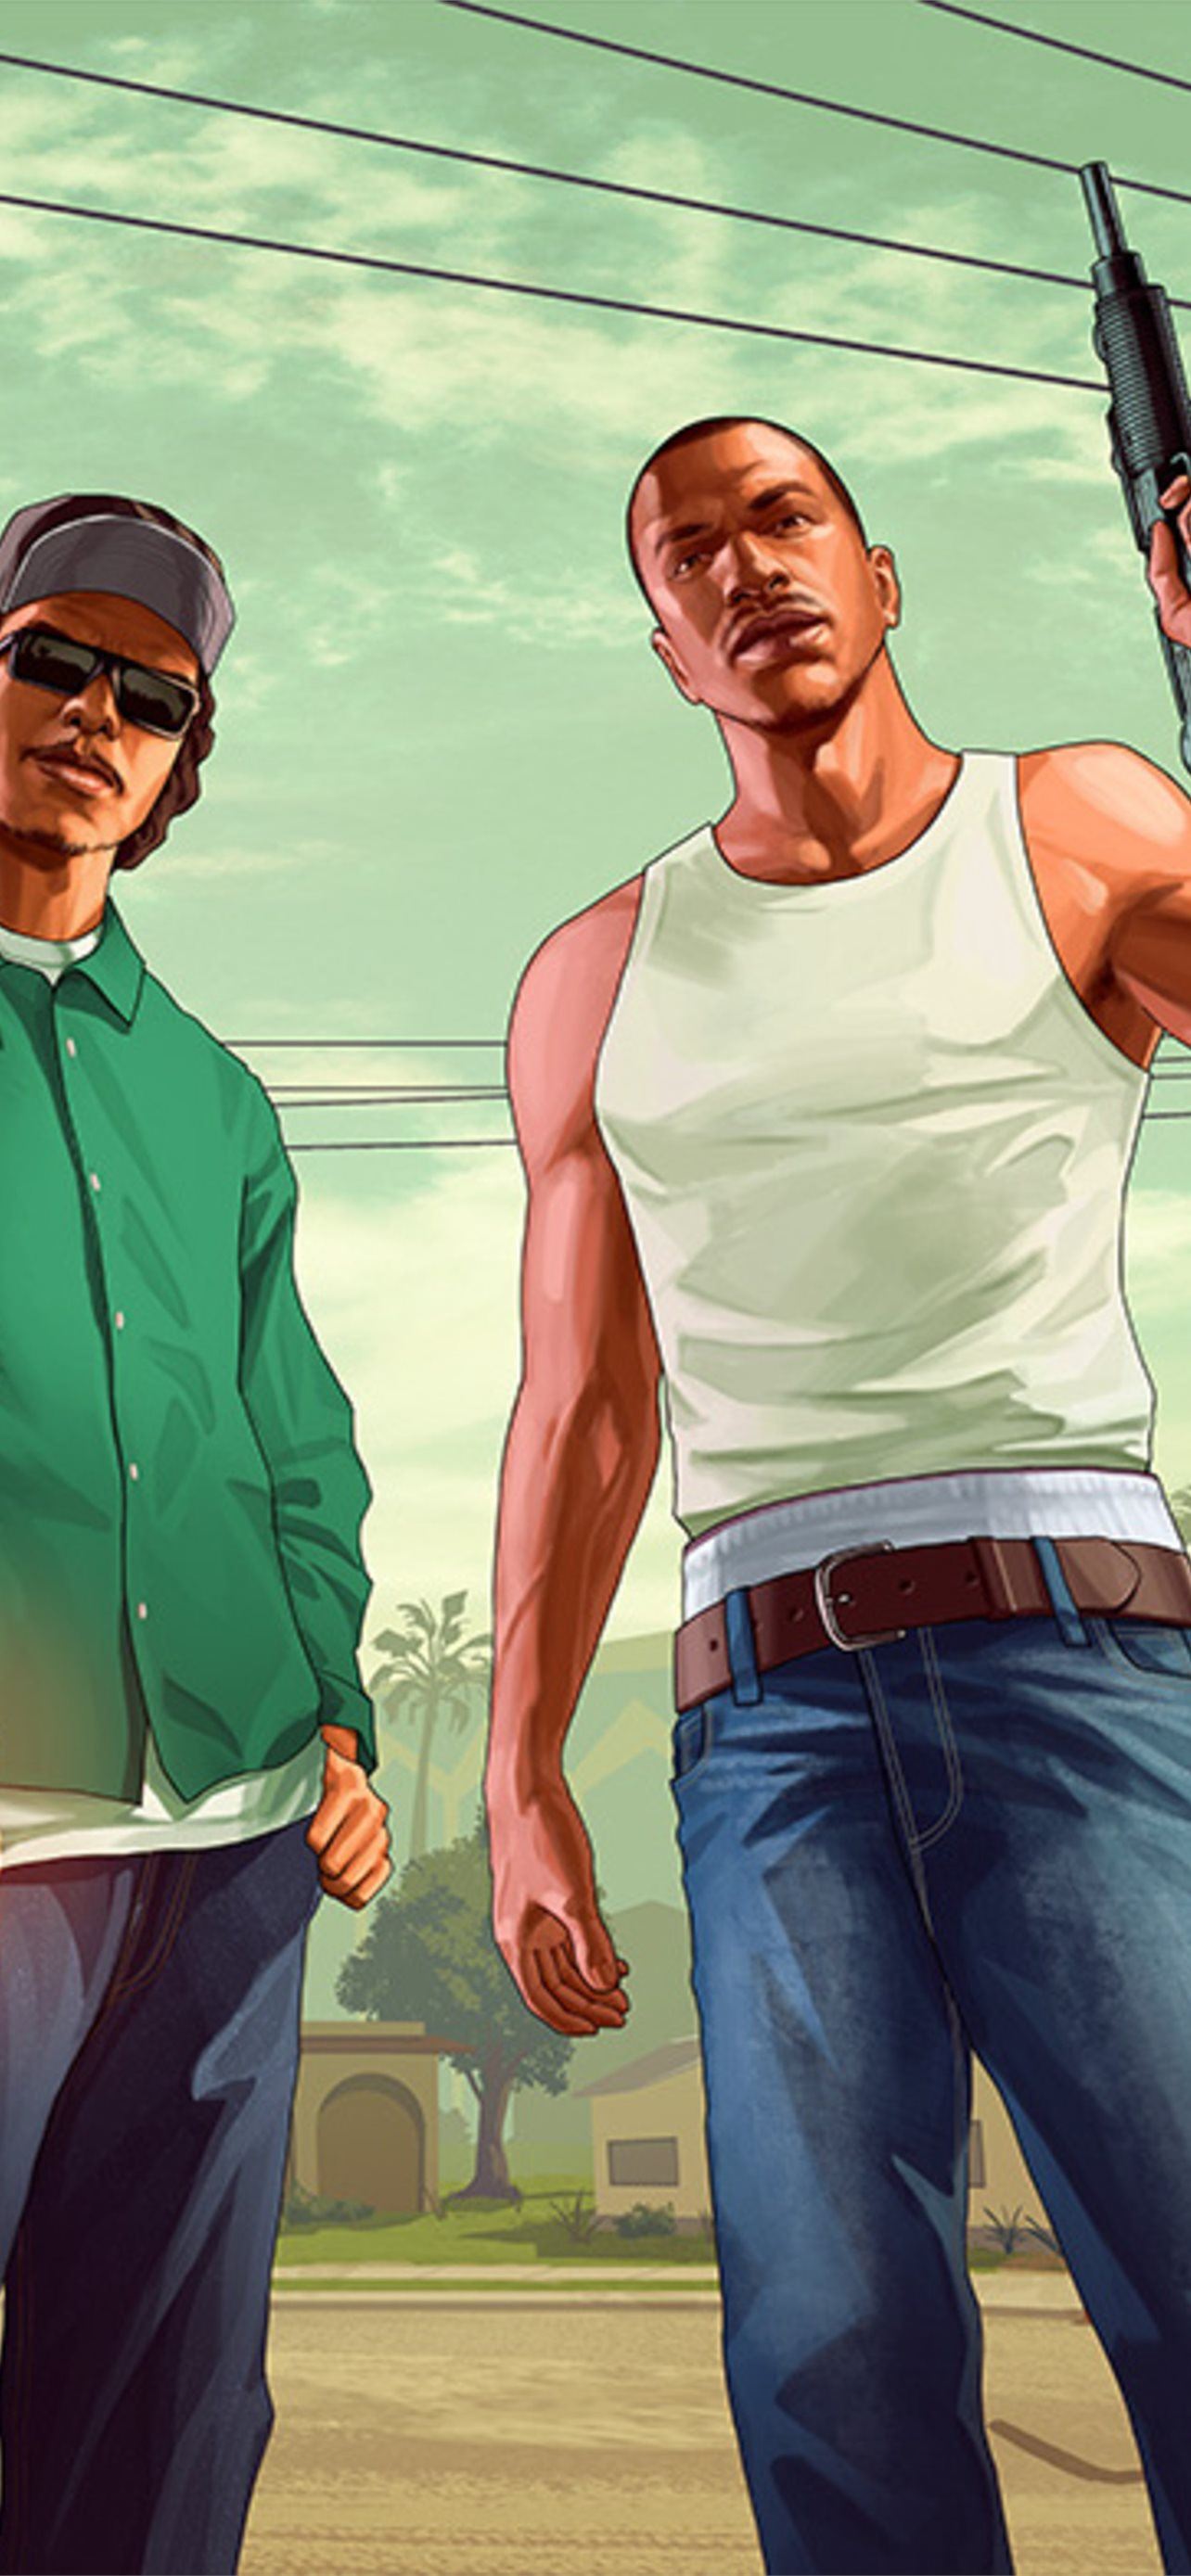 san andreas movie iPhone Wallpaper Free Download